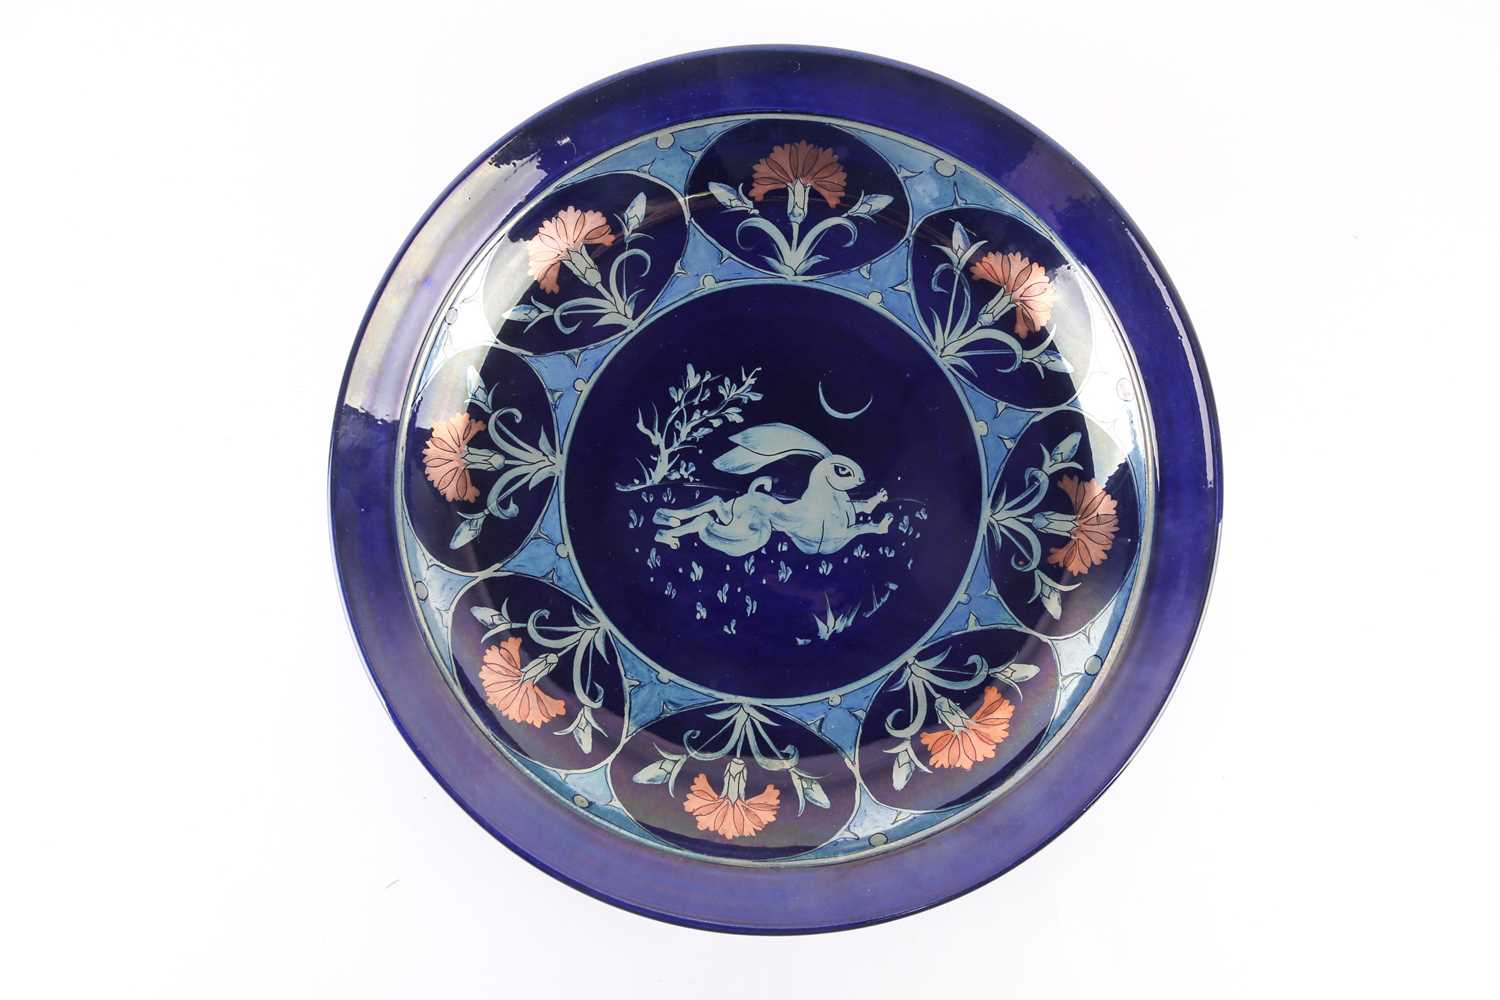 A contemporary Arts & Crafts style blue lustre charger, in the manner of John Pearson, the well with